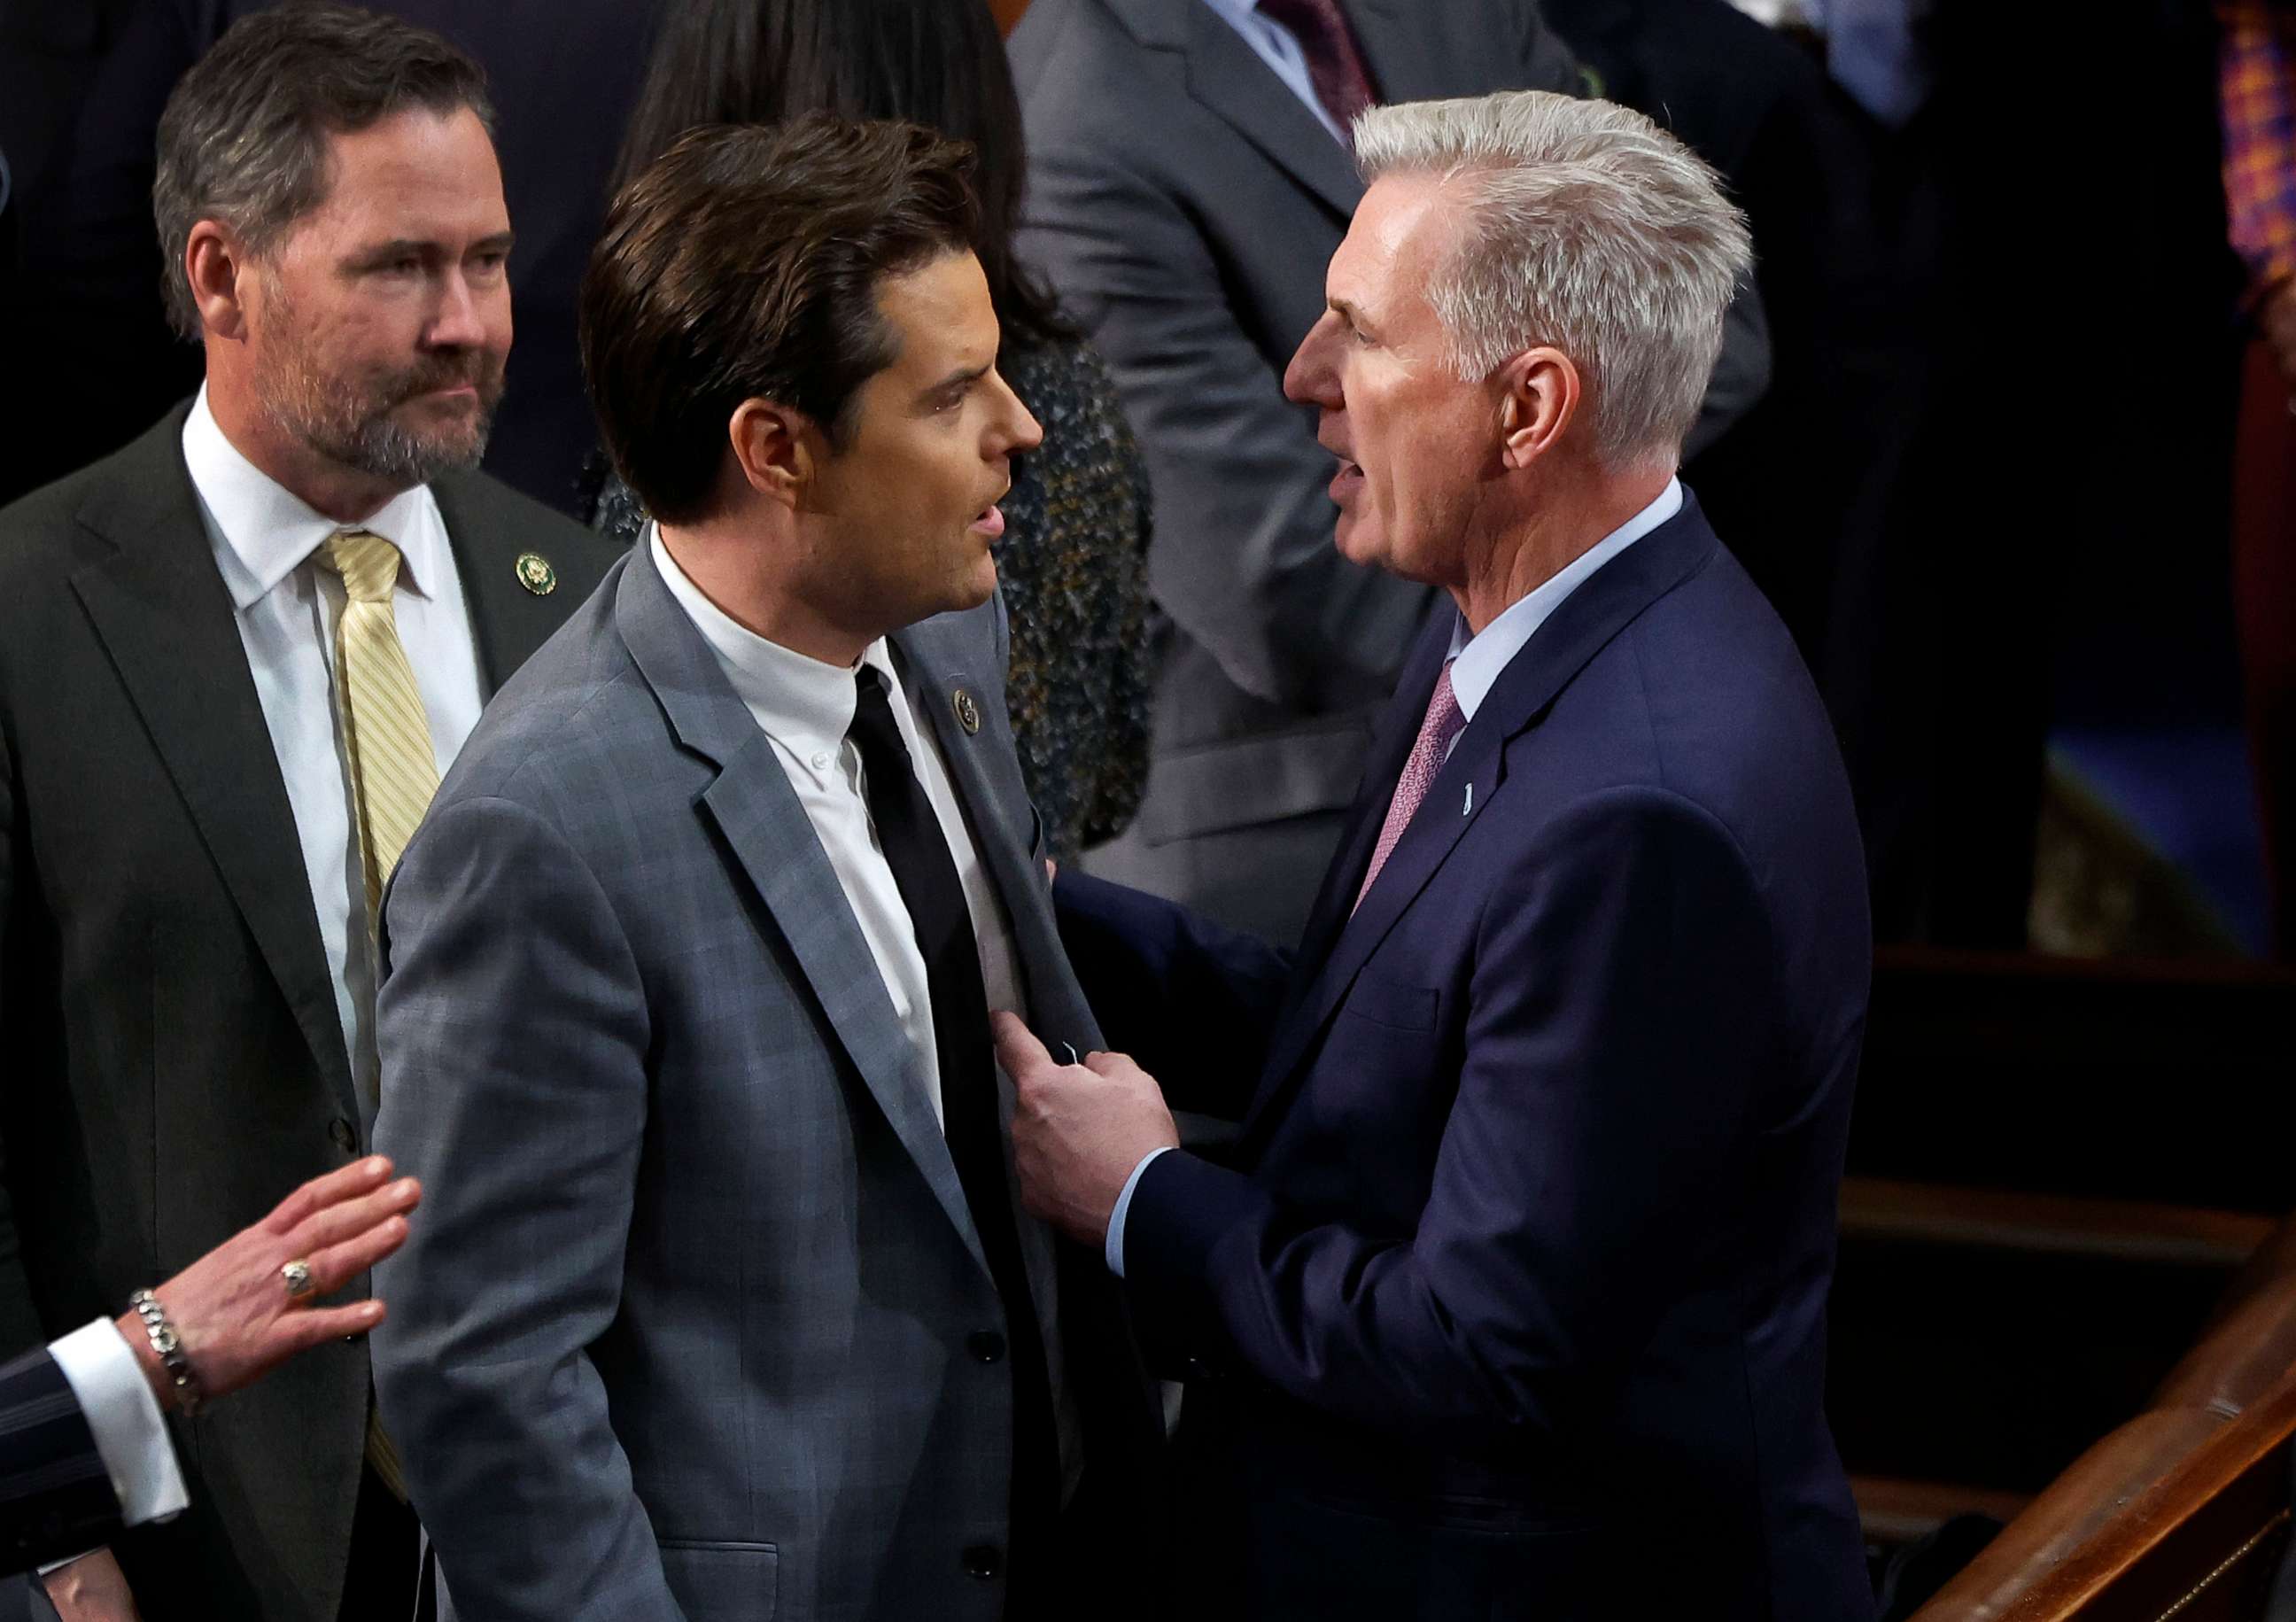 PHOTO: U.S. House Republican Leader Kevin McCarthy (R-CA) talks to Rep.-elect Matt Gaetz (R-FL) in the House Chamber on the fourth day of voting for Speaker of the House at the U.S. Capitol Building, Jan. 6, 2023, in Washington.